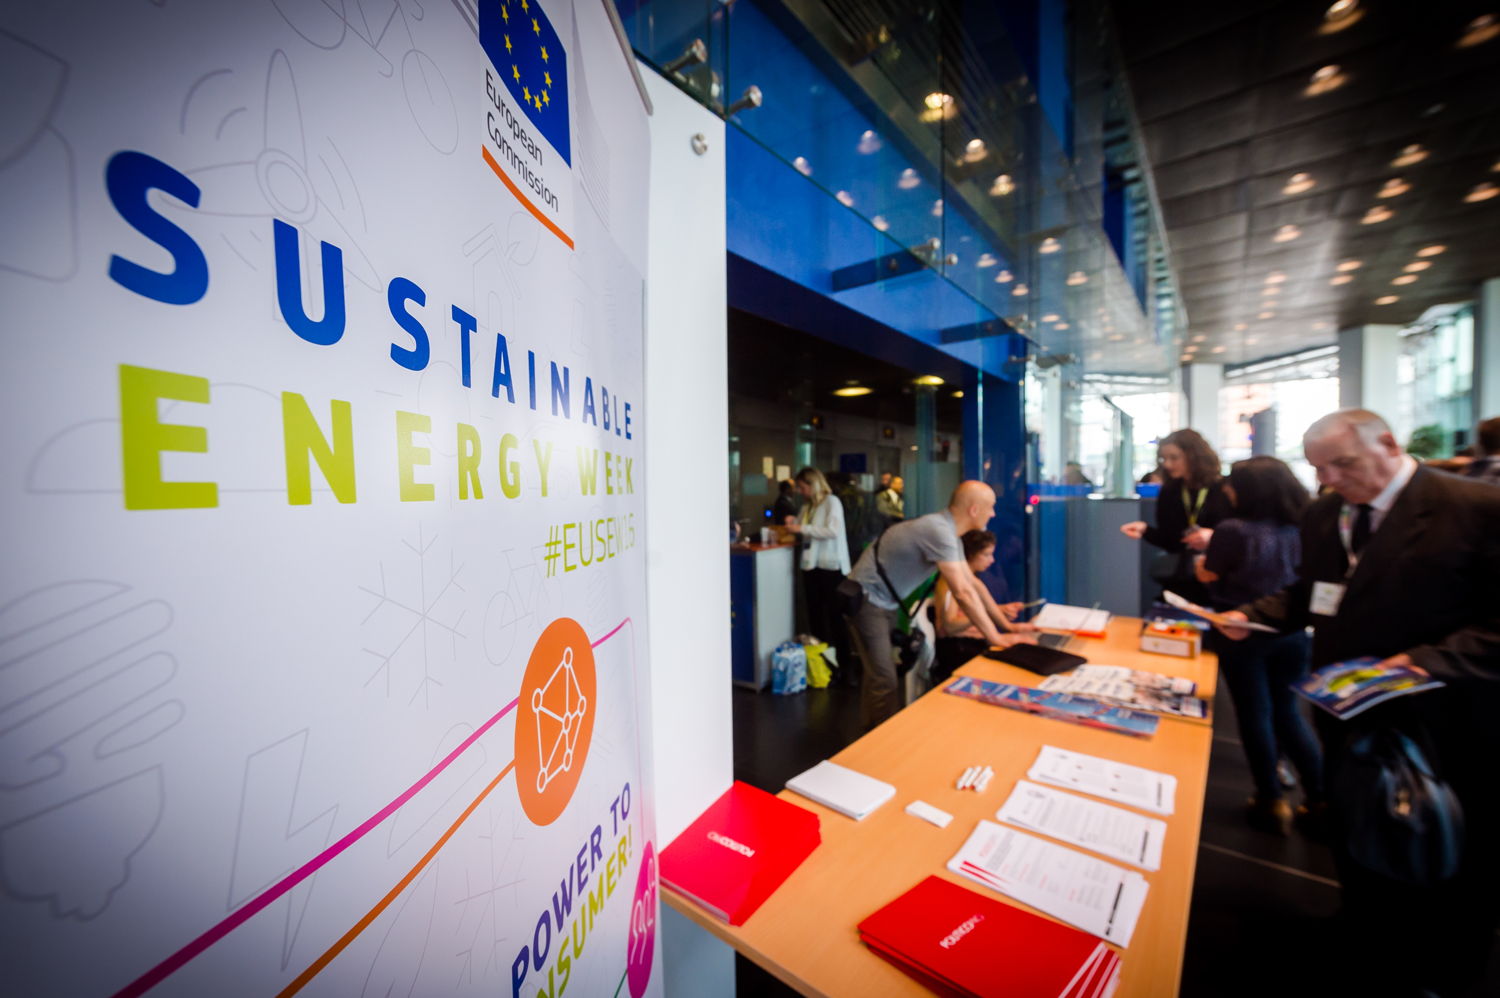 EUSEW 2016 - Policy Conference 